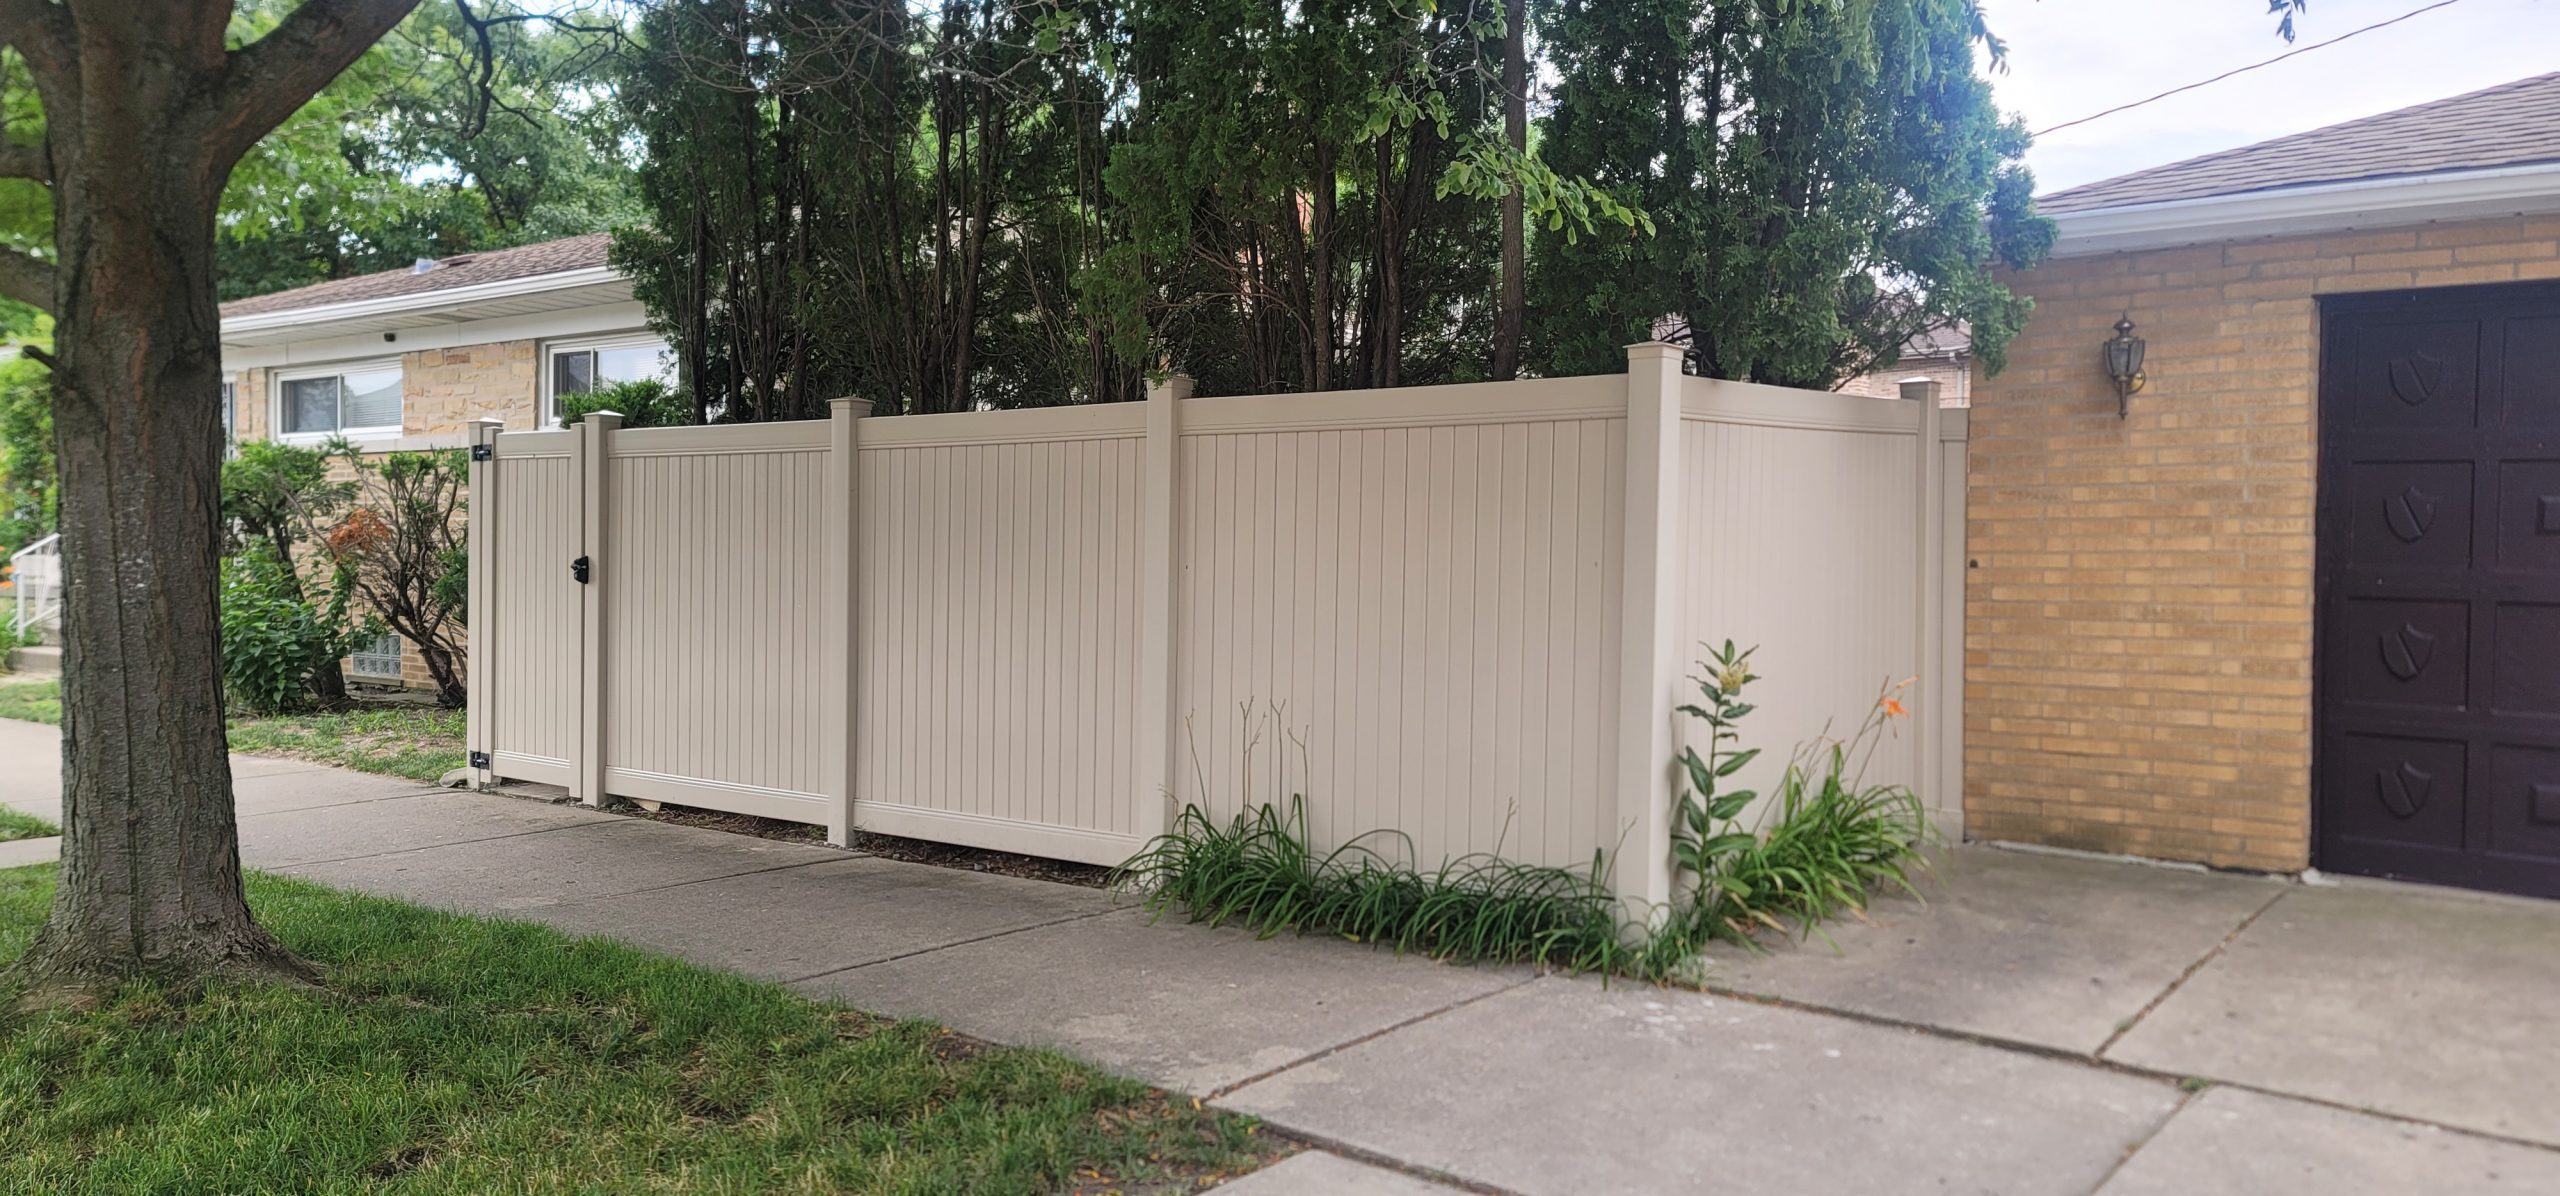 Why Do You Need Commercial Vinyl Fencing?